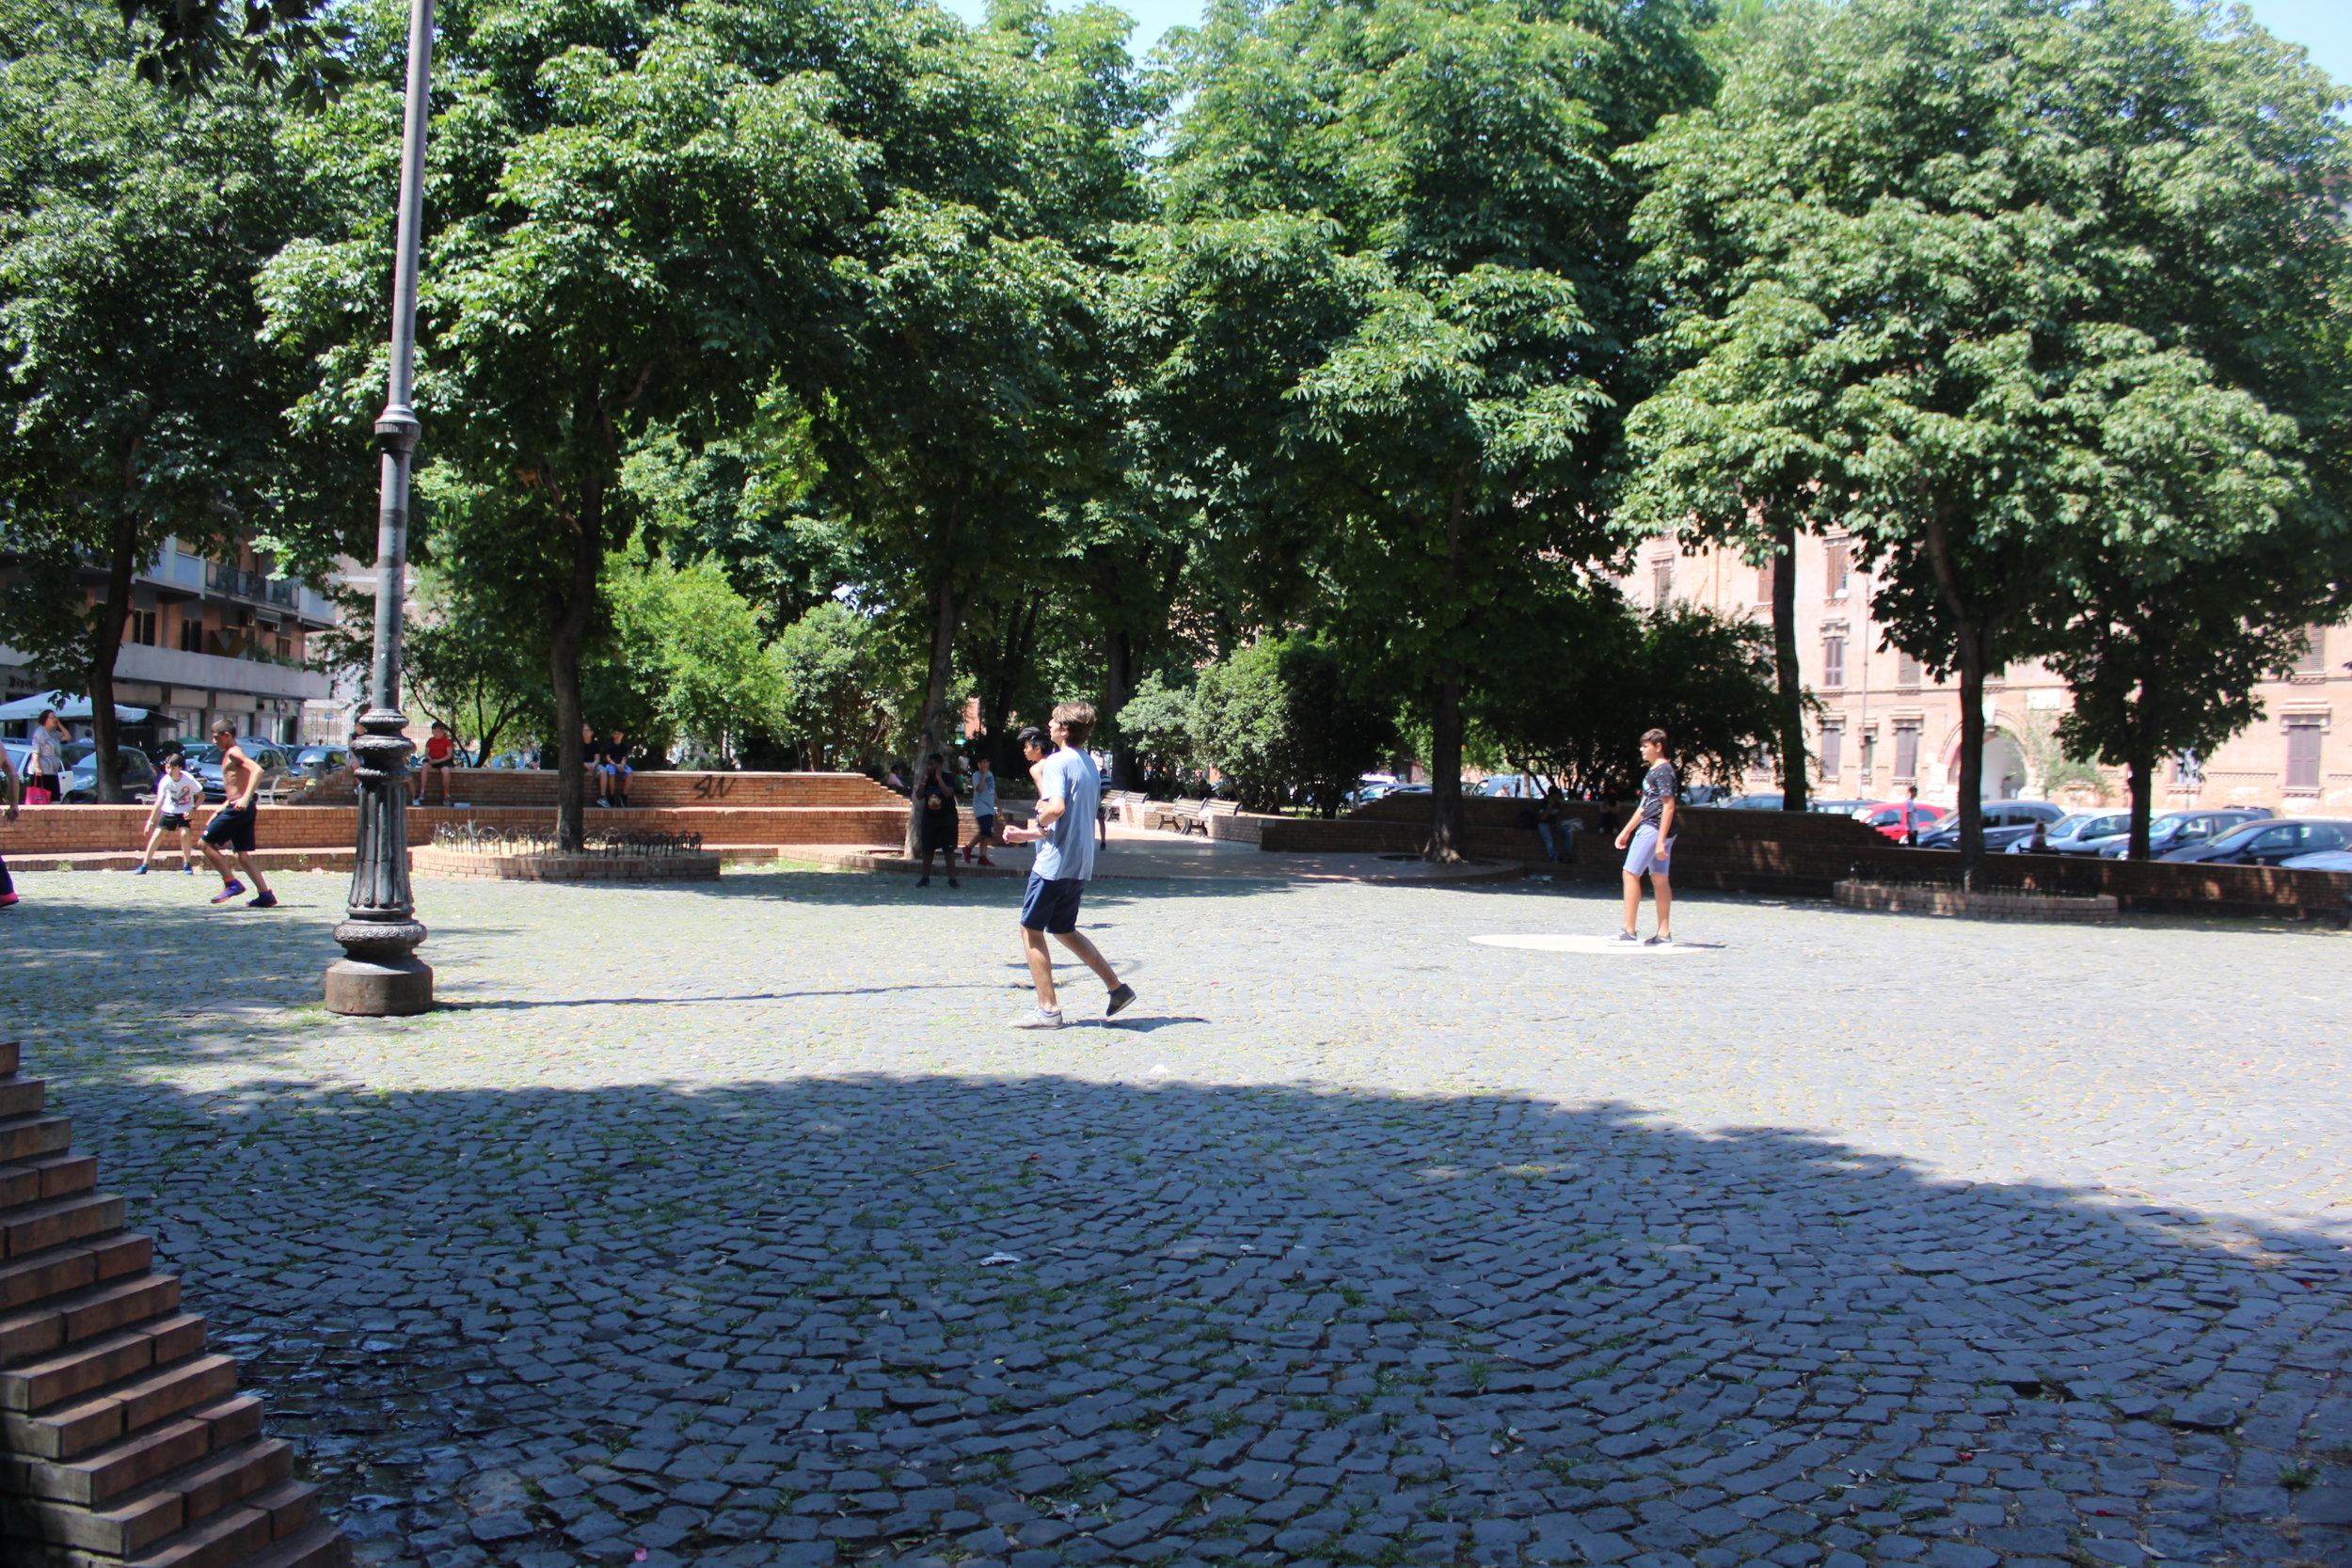 Local kids playing a game of pick-up football.&nbsp;